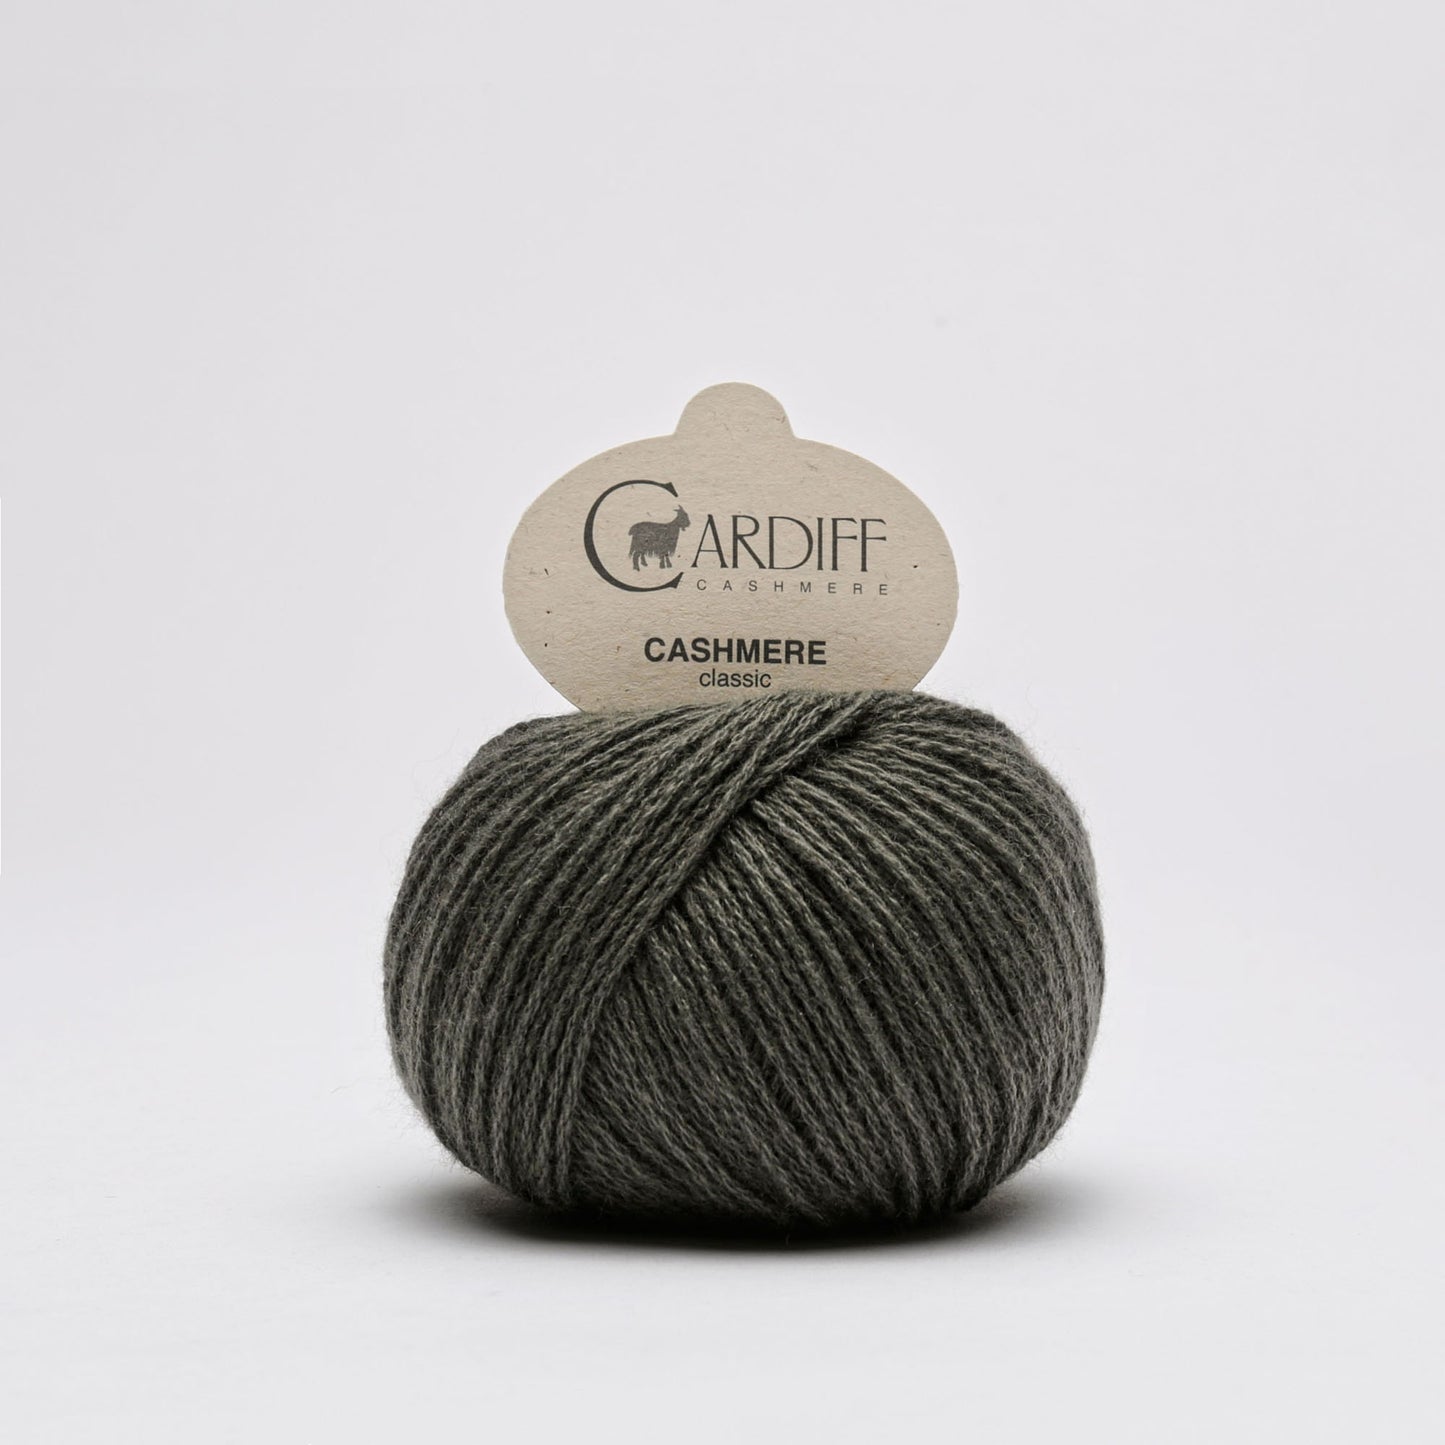 Cardiff CLASSIC gentle yarn, 704, CIRCUS, comp: 100% Cashmere